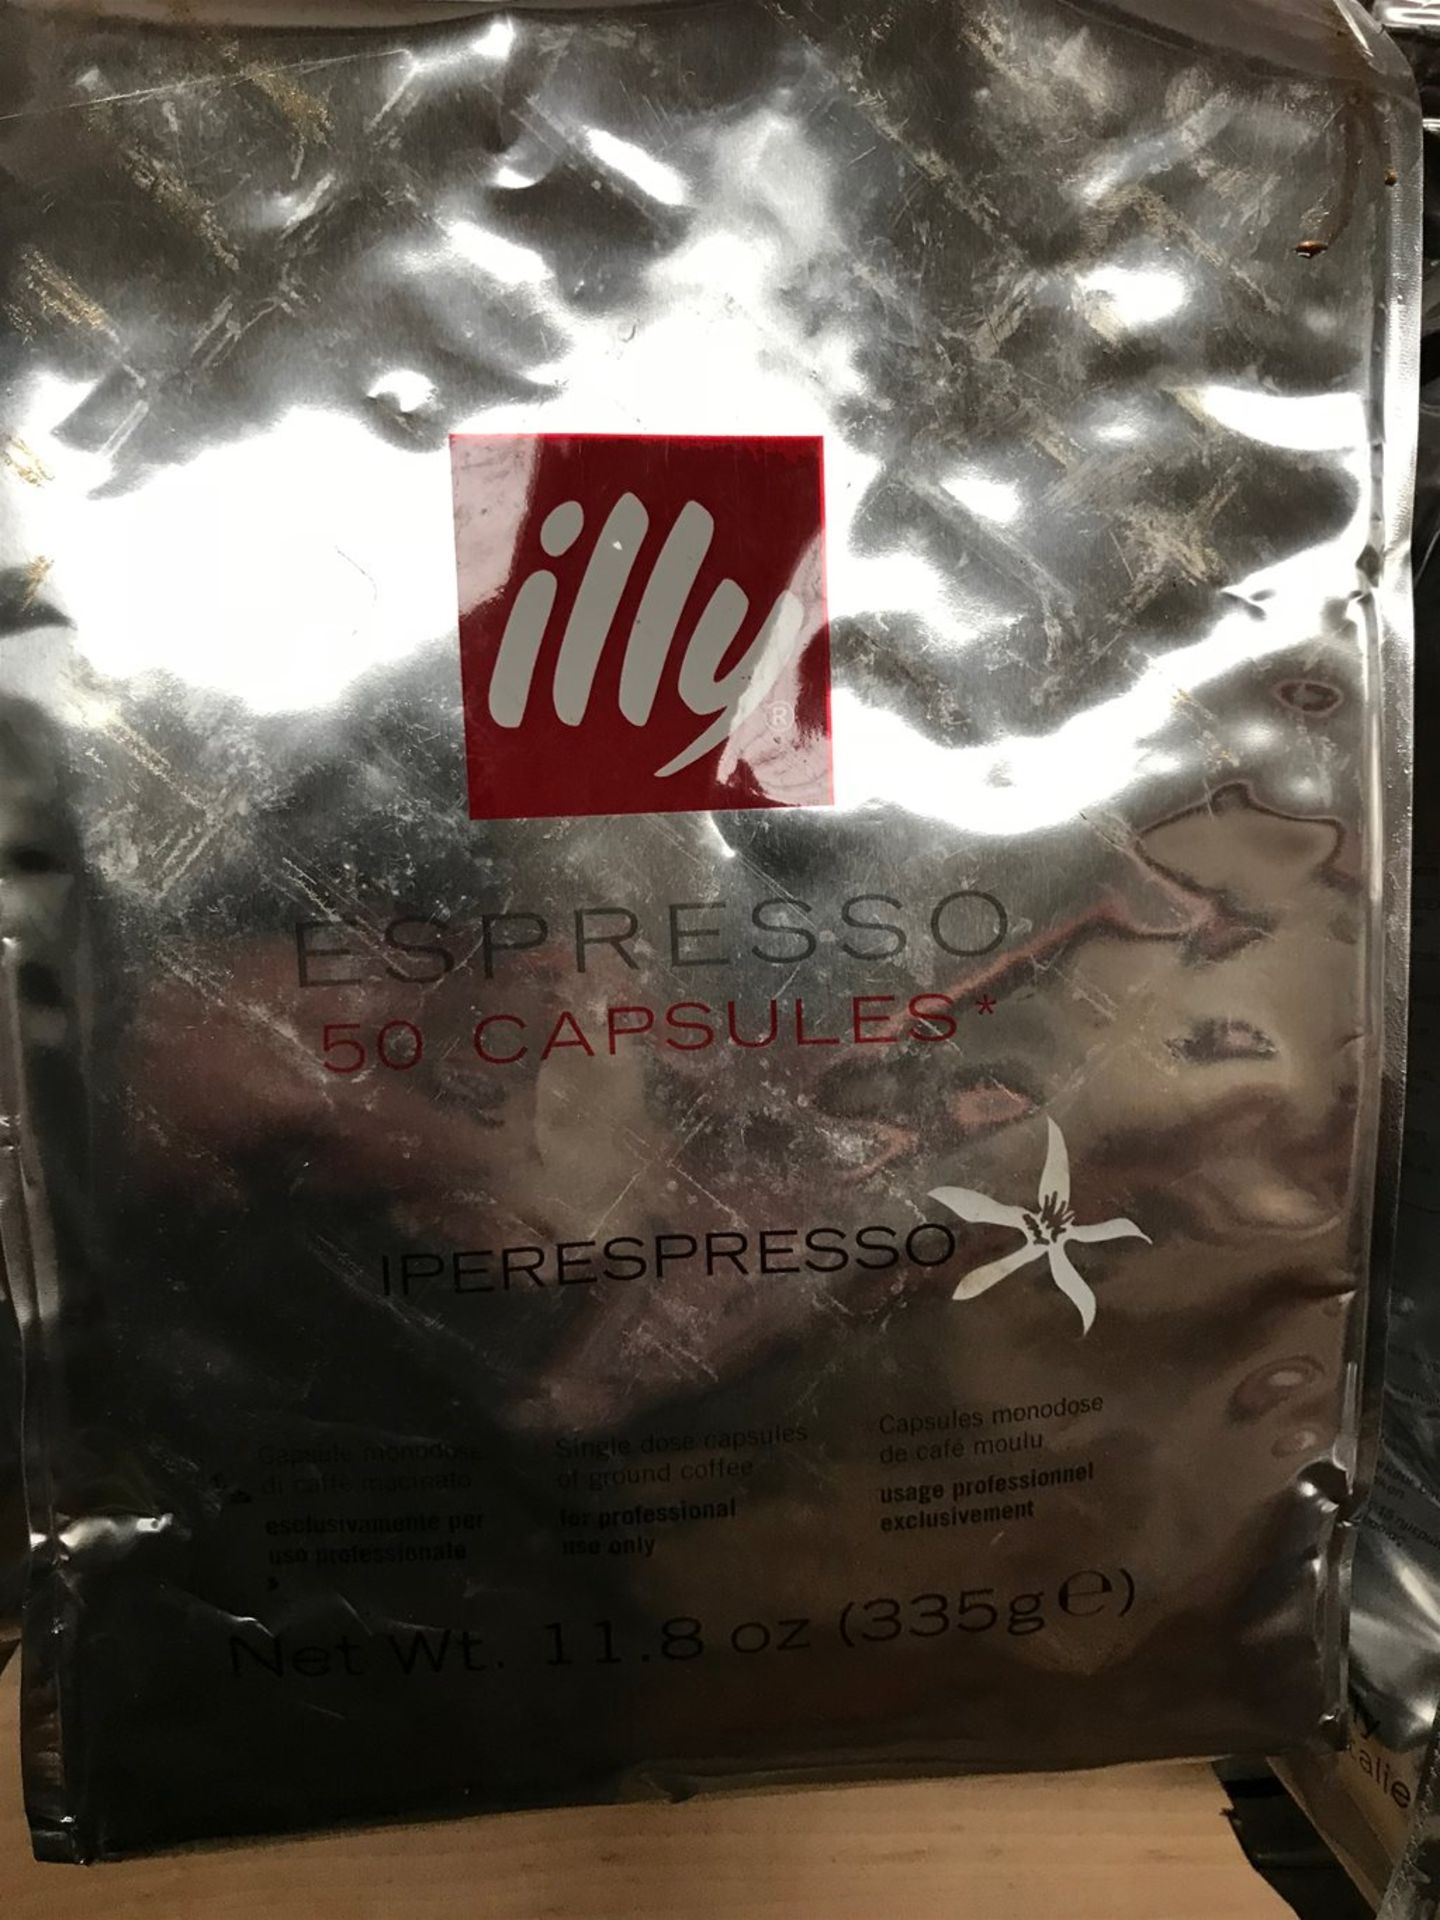 Illy Coffee Sachets - 14 Packets each Containing 25 servings - Image 2 of 3